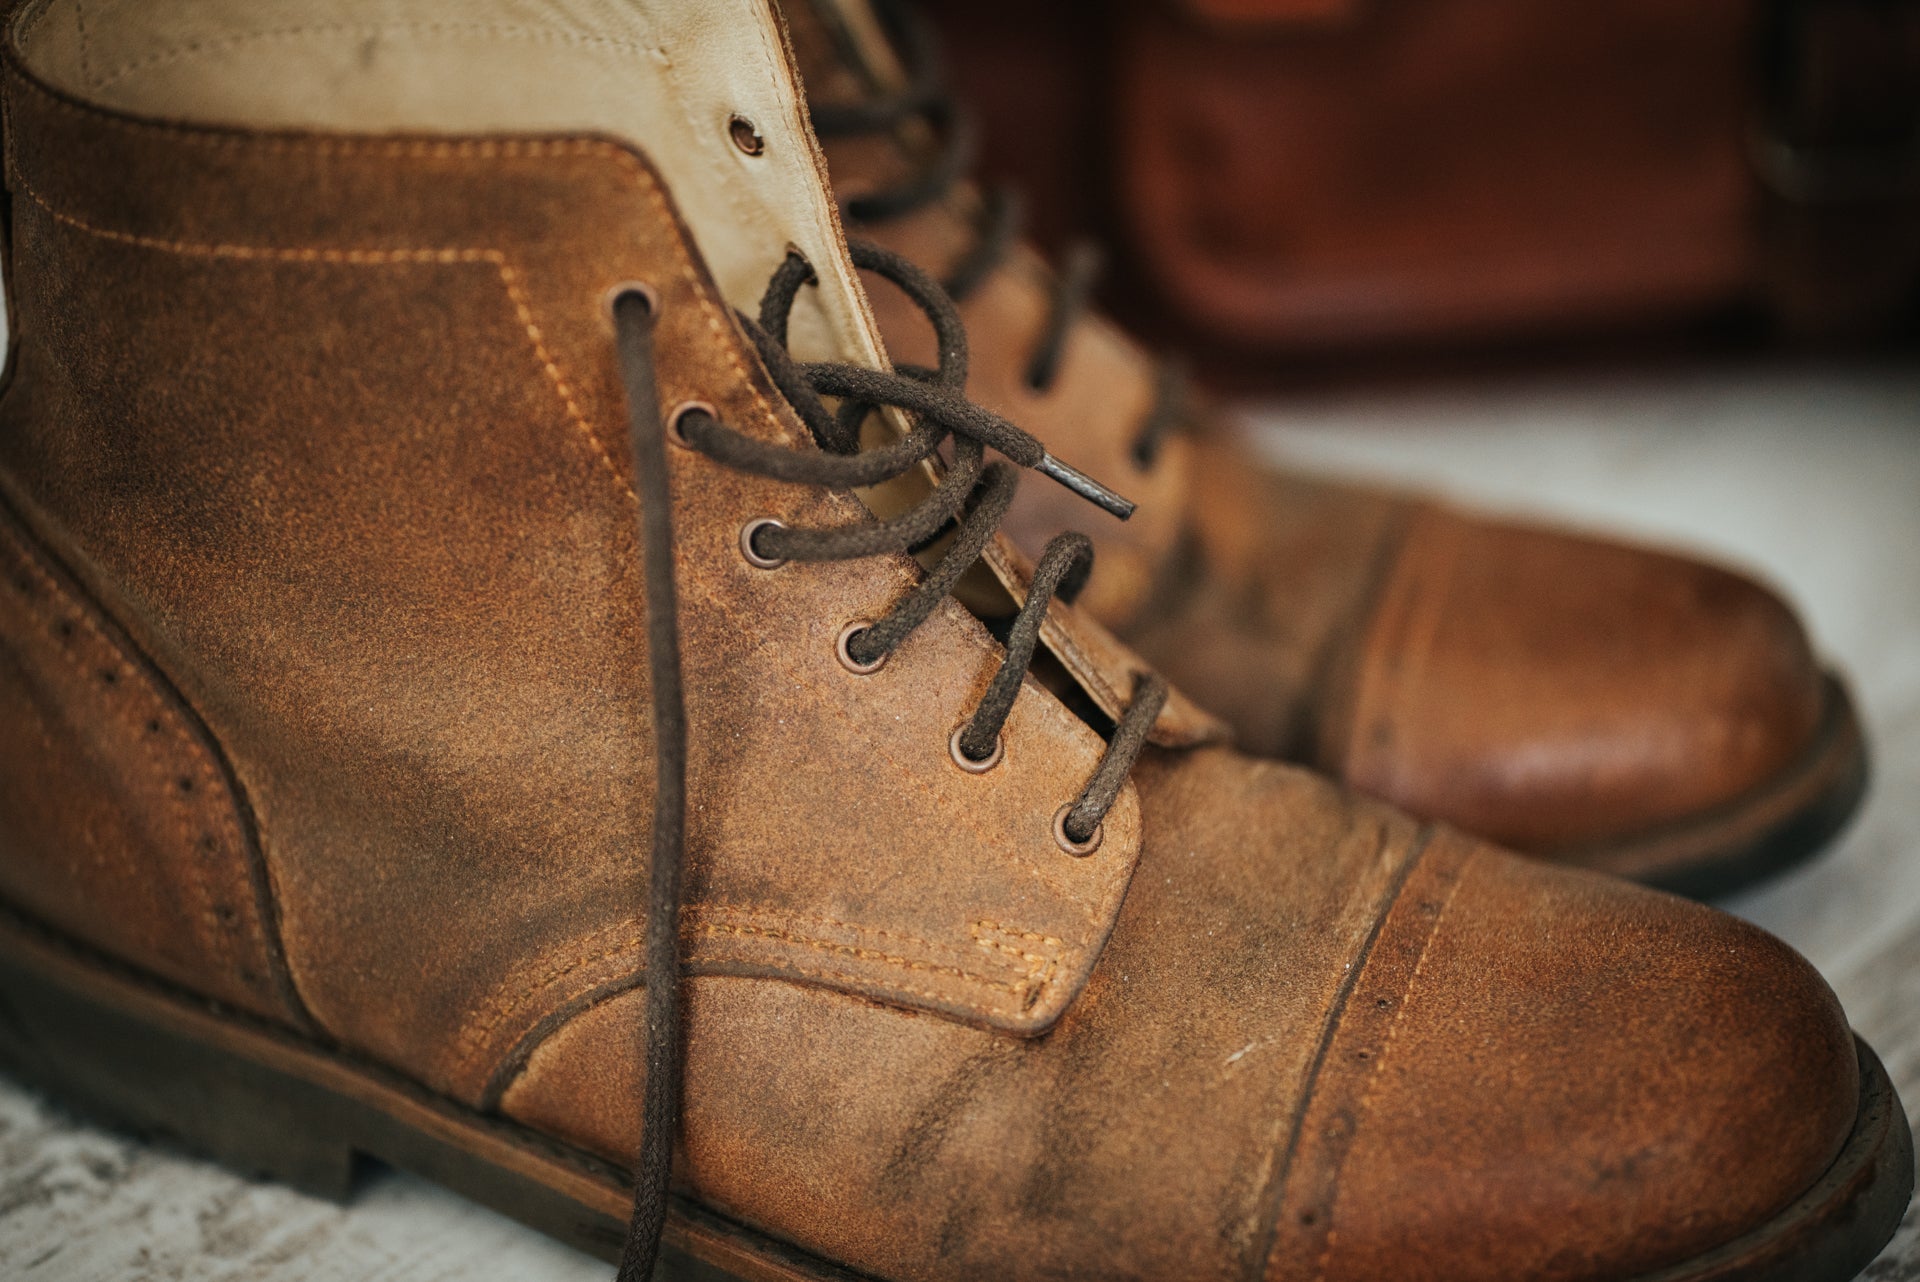 Tejo Boots - OldMulla - Boots Store, Handmade By George